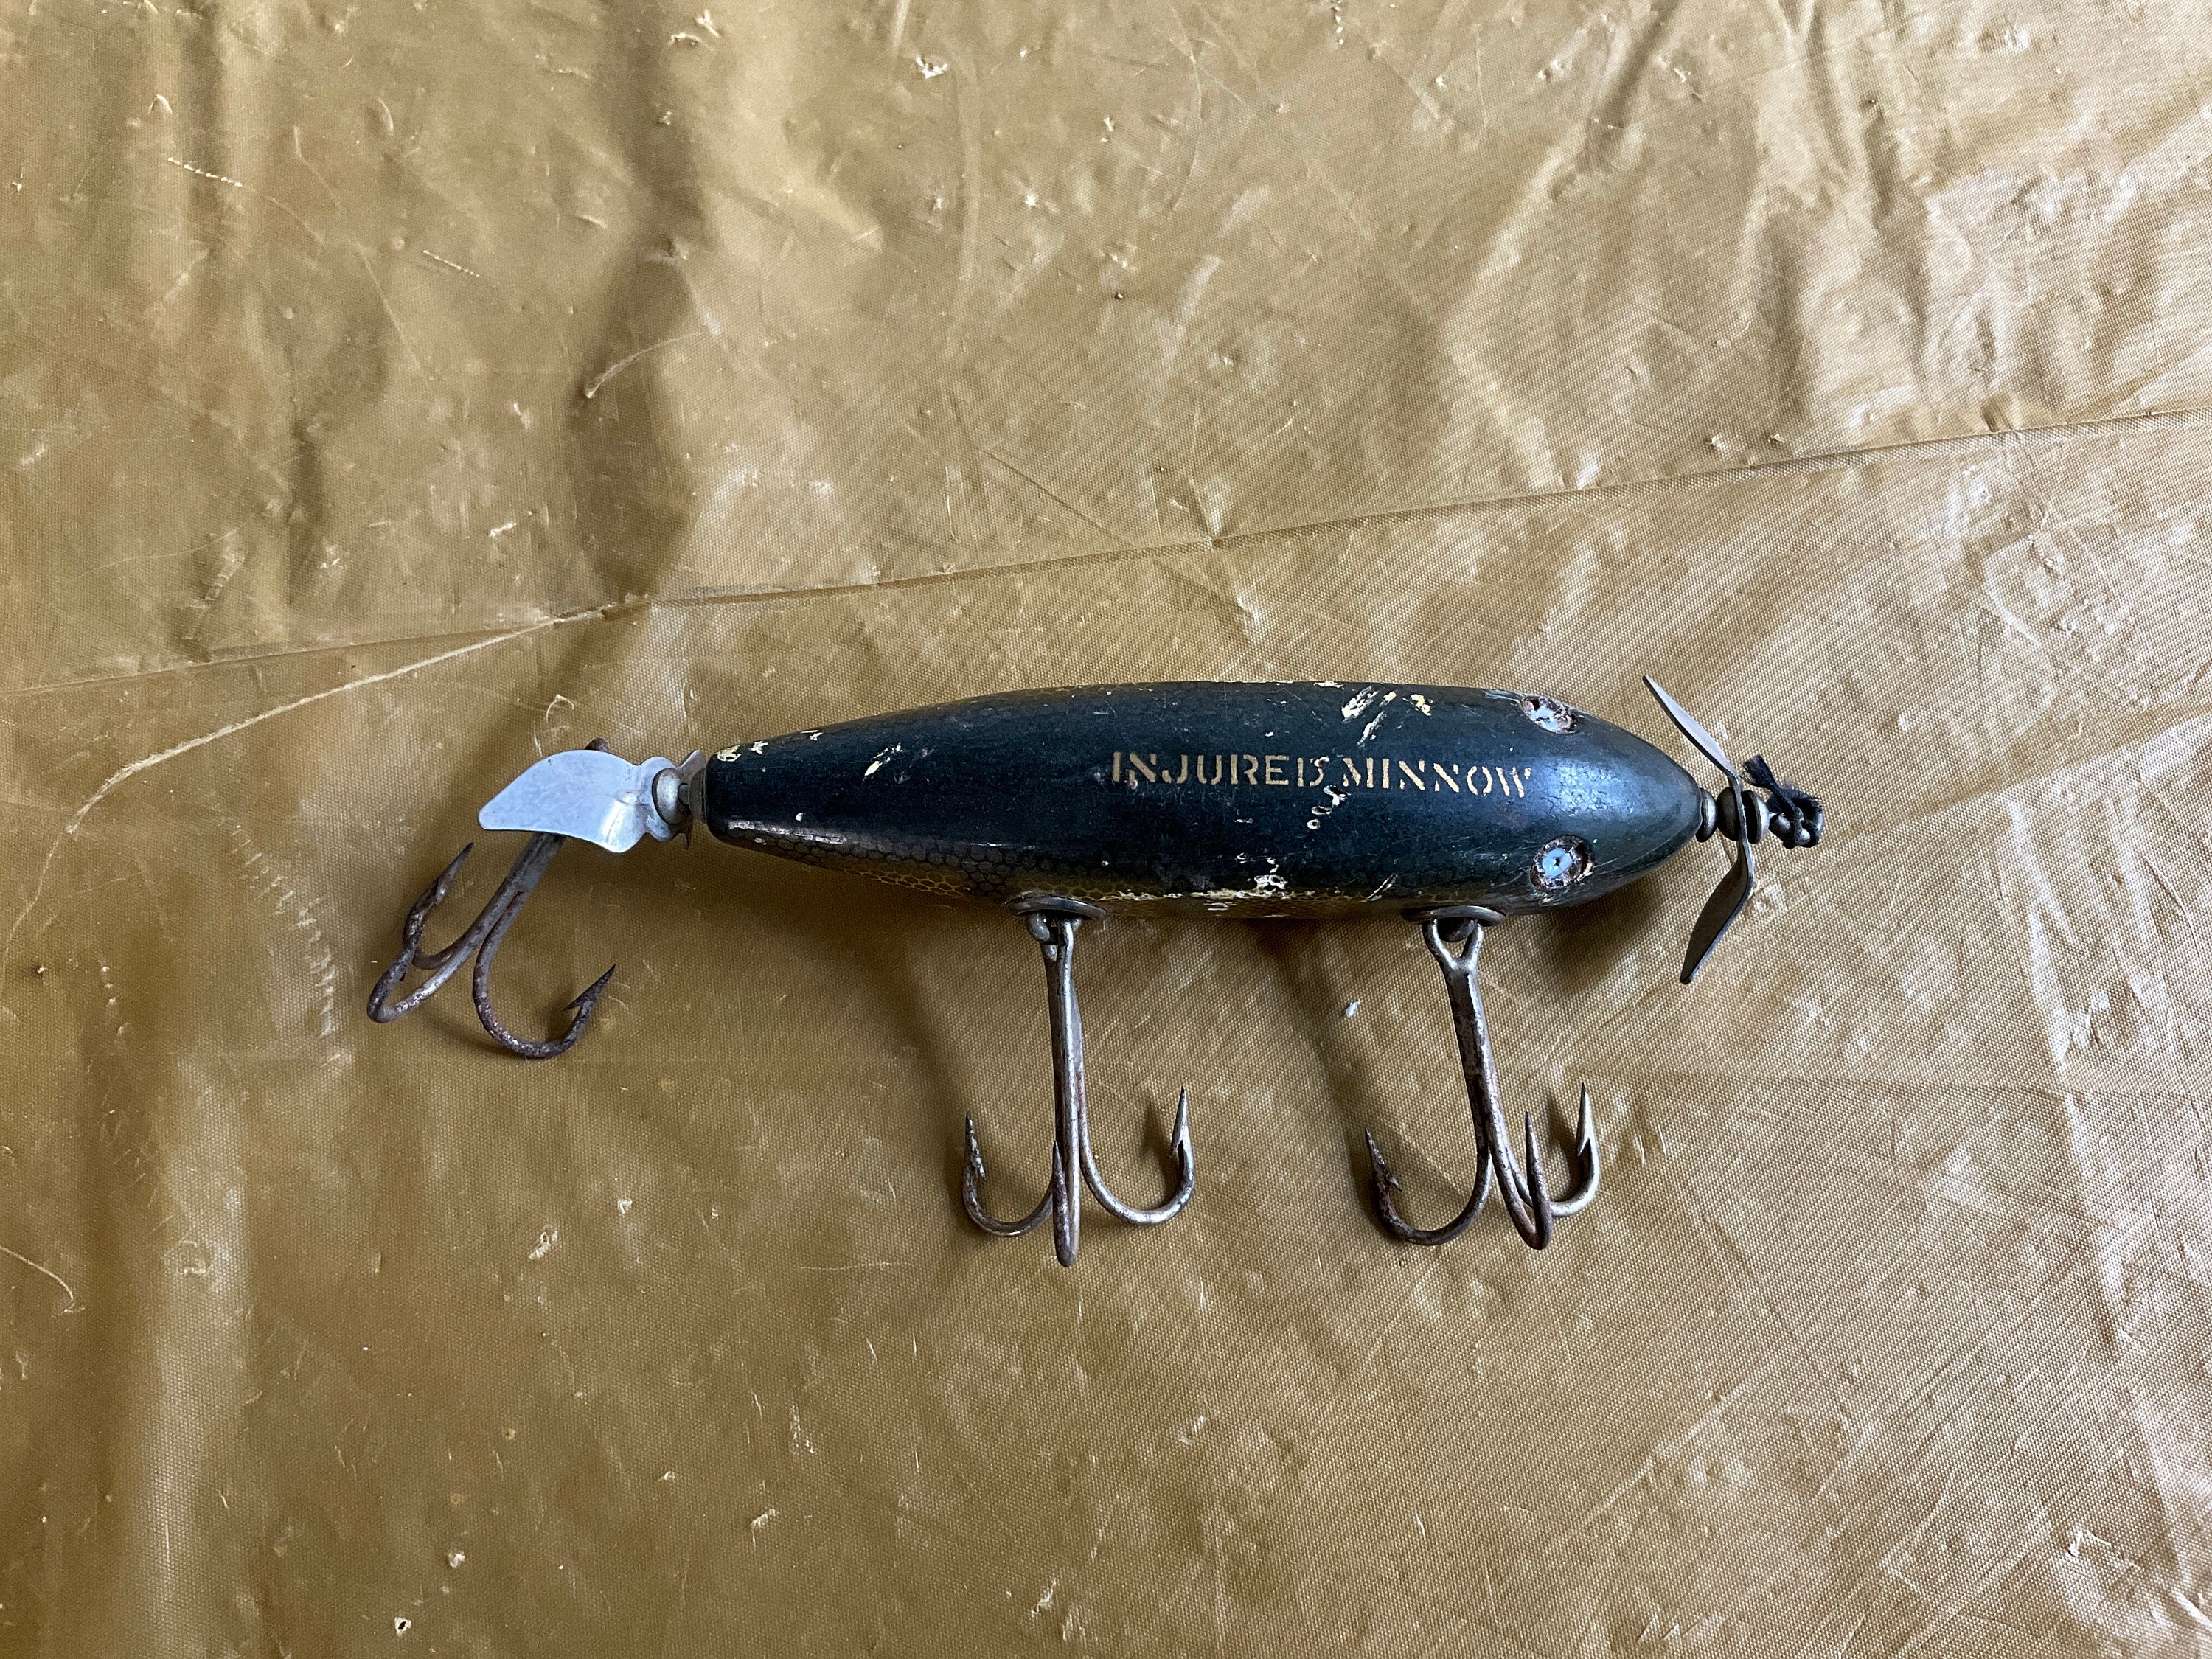 Creek Chub Injured Minnow Fishing Lure  Old Antique & Vintage Wood Fishing  Lures Reels Tackle & More